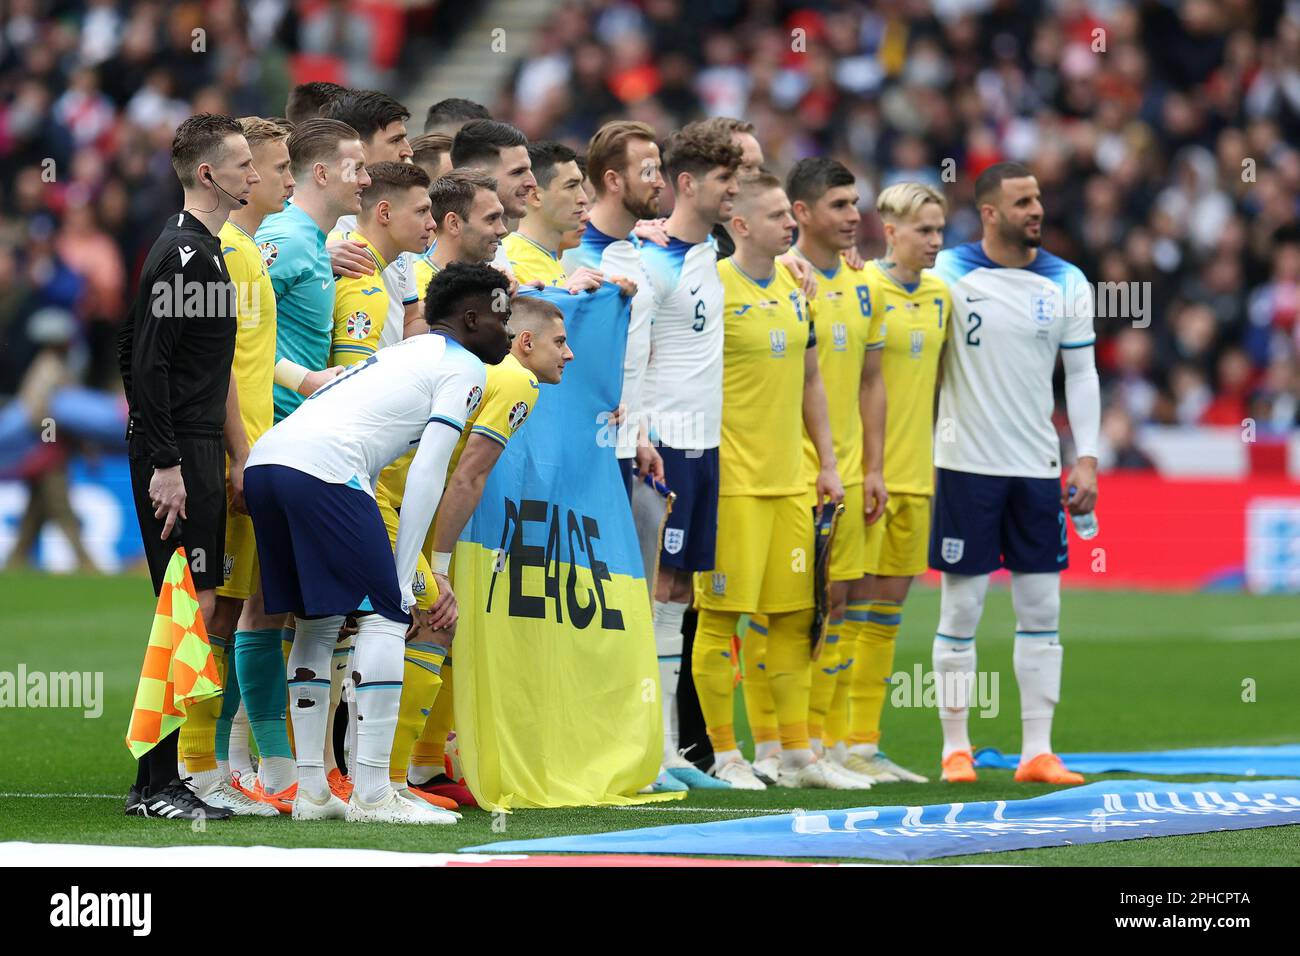 London, UK. 26th Mar, 2023. England and Ukraine players pose with a peace flag ahead of k/o. England v Ukraine, UEFA Euro 2024 qualifier International group C match at Wembley Stadium in London on Sunday 26th March 2023. Editorial use only. pic by Andrew Orchard/Andrew Orchard sports photography/Alamy Live News Credit: Andrew Orchard sports photography/Alamy Live News Stock Photo